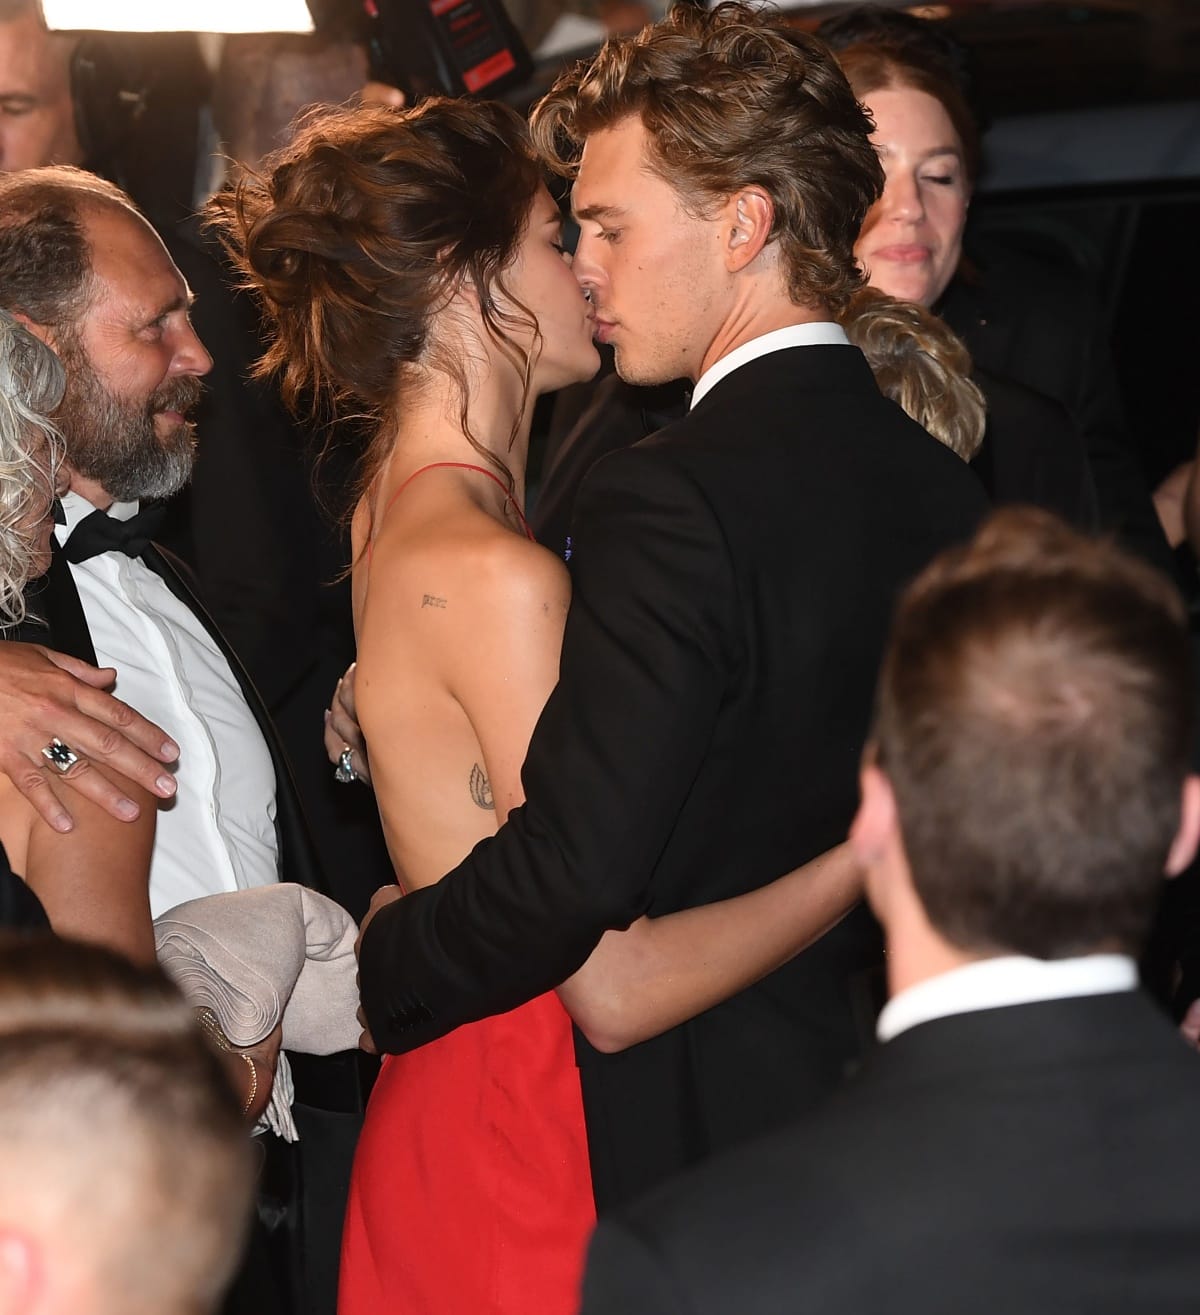 Kaia Gerber and Austin Butler sharing a passionate kiss at the Elvis premiere during the 75th Cannes Film Festival